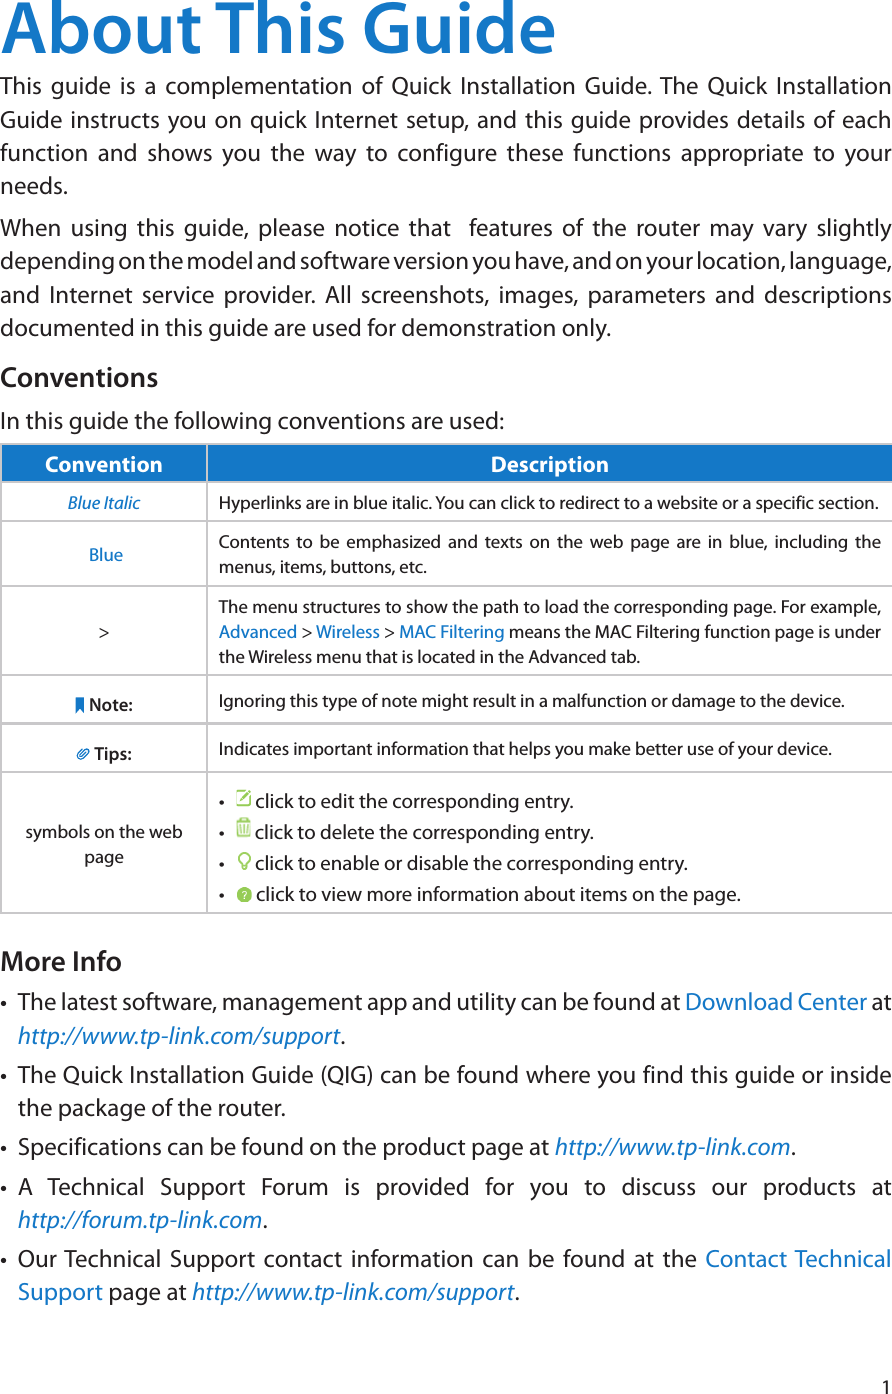 1About This GuideThis guide is a complementation of Quick Installation Guide. The Quick Installation Guide instructs you on quick Internet setup, and this guide provides details of each function and shows you the way to configure these functions appropriate to your needs. When using this guide, please notice that  features of the router may vary slightly depending on the model and software version you have, and on your location, language, and Internet service provider. All screenshots, images, parameters and descriptions documented in this guide are used for demonstration only.ConventionsIn this guide the following conventions are used:Convention DescriptionBlue Italic Hyperlinks are in blue italic. You can click to redirect to a website or a specific section. Blue Contents to be emphasized and texts on the web page are in blue, including the menus, items, buttons, etc.&gt;The menu structures to show the path to load the corresponding page. For example, Advanced &gt; Wireless &gt; MAC Filtering means the MAC Filtering function page is under the Wireless menu that is located in the Advanced tab.Note: Ignoring this type of note might result in a malfunction or damage to the device.Tips: Indicates important information that helps you make better use of your device.symbols on the web page•   click to edit the corresponding entry.•   click to delete the corresponding entry.•   click to enable or disable the corresponding entry.•   click to view more information about items on the page.More Info•  The latest software, management app and utility can be found at Download Center at http://www.tp-link.com/support.•  The Quick Installation Guide (QIG) can be found where you find this guide or inside the package of the router.•  Specifications can be found on the product page at http://www.tp-link.com.•  A Technical Support Forum is provided for you to discuss our products at  http://forum.tp-link.com.•  Our Technical Support contact information can be found at the Contact Technical Support page at http://www.tp-link.com/support.